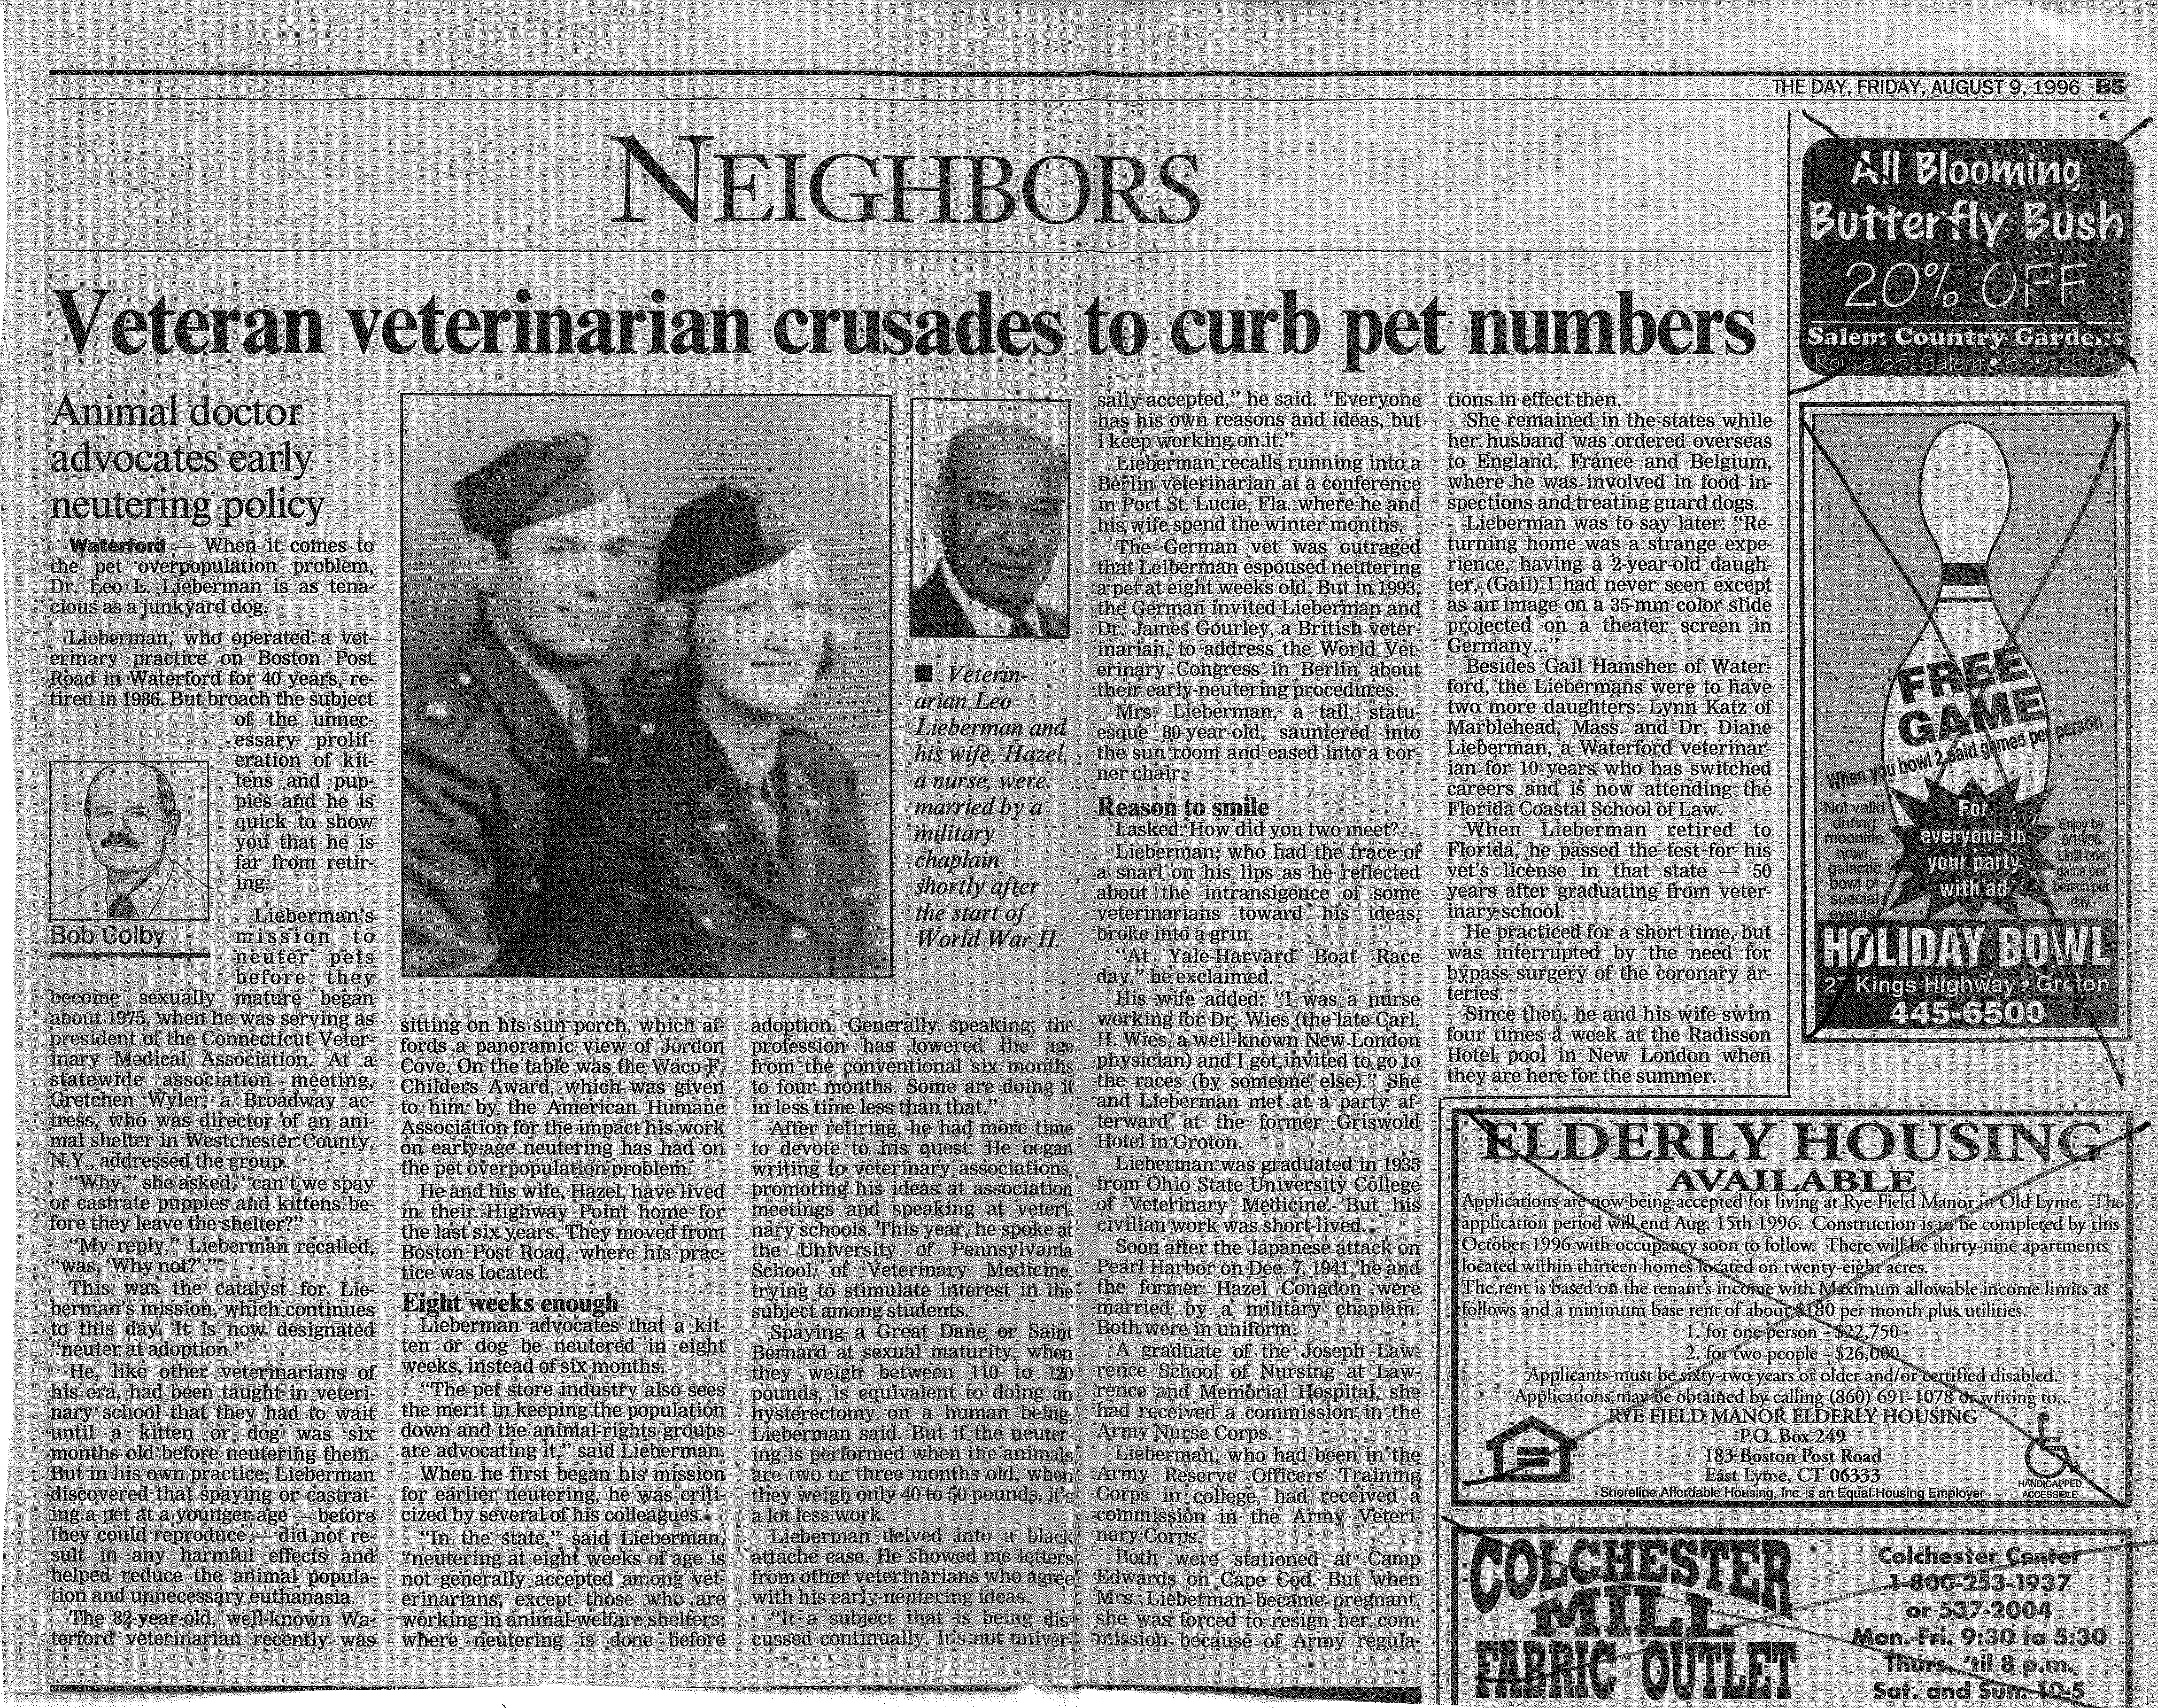 Newspaper about Lieberman’s advocacy work in The Day, August 9, 1996 (Box 14, Folder 20)